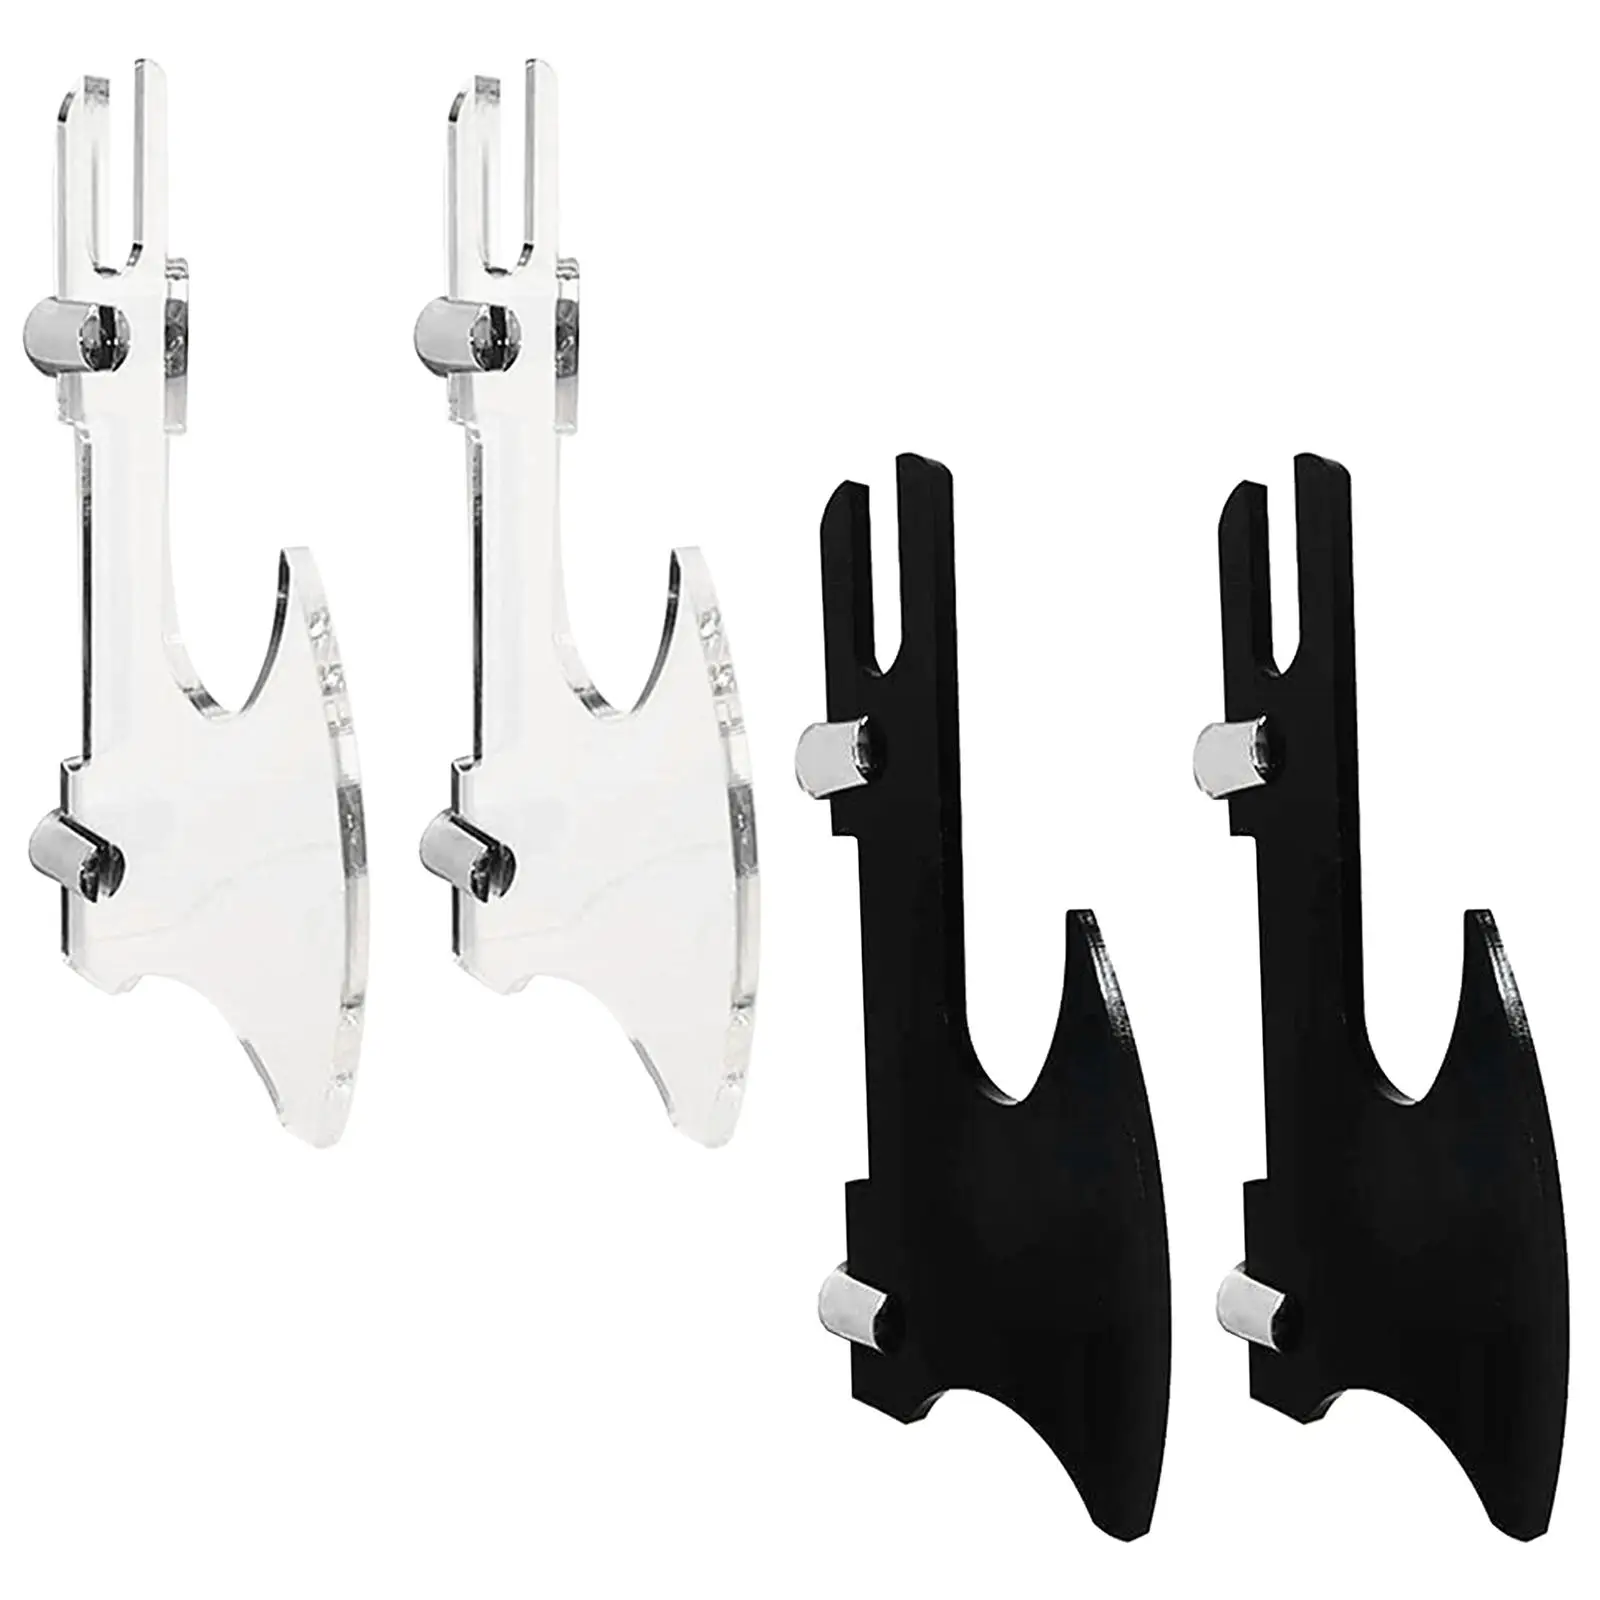 Wall Sword Display Stand Universal Support All Swords Sword Rack Adults Gifts